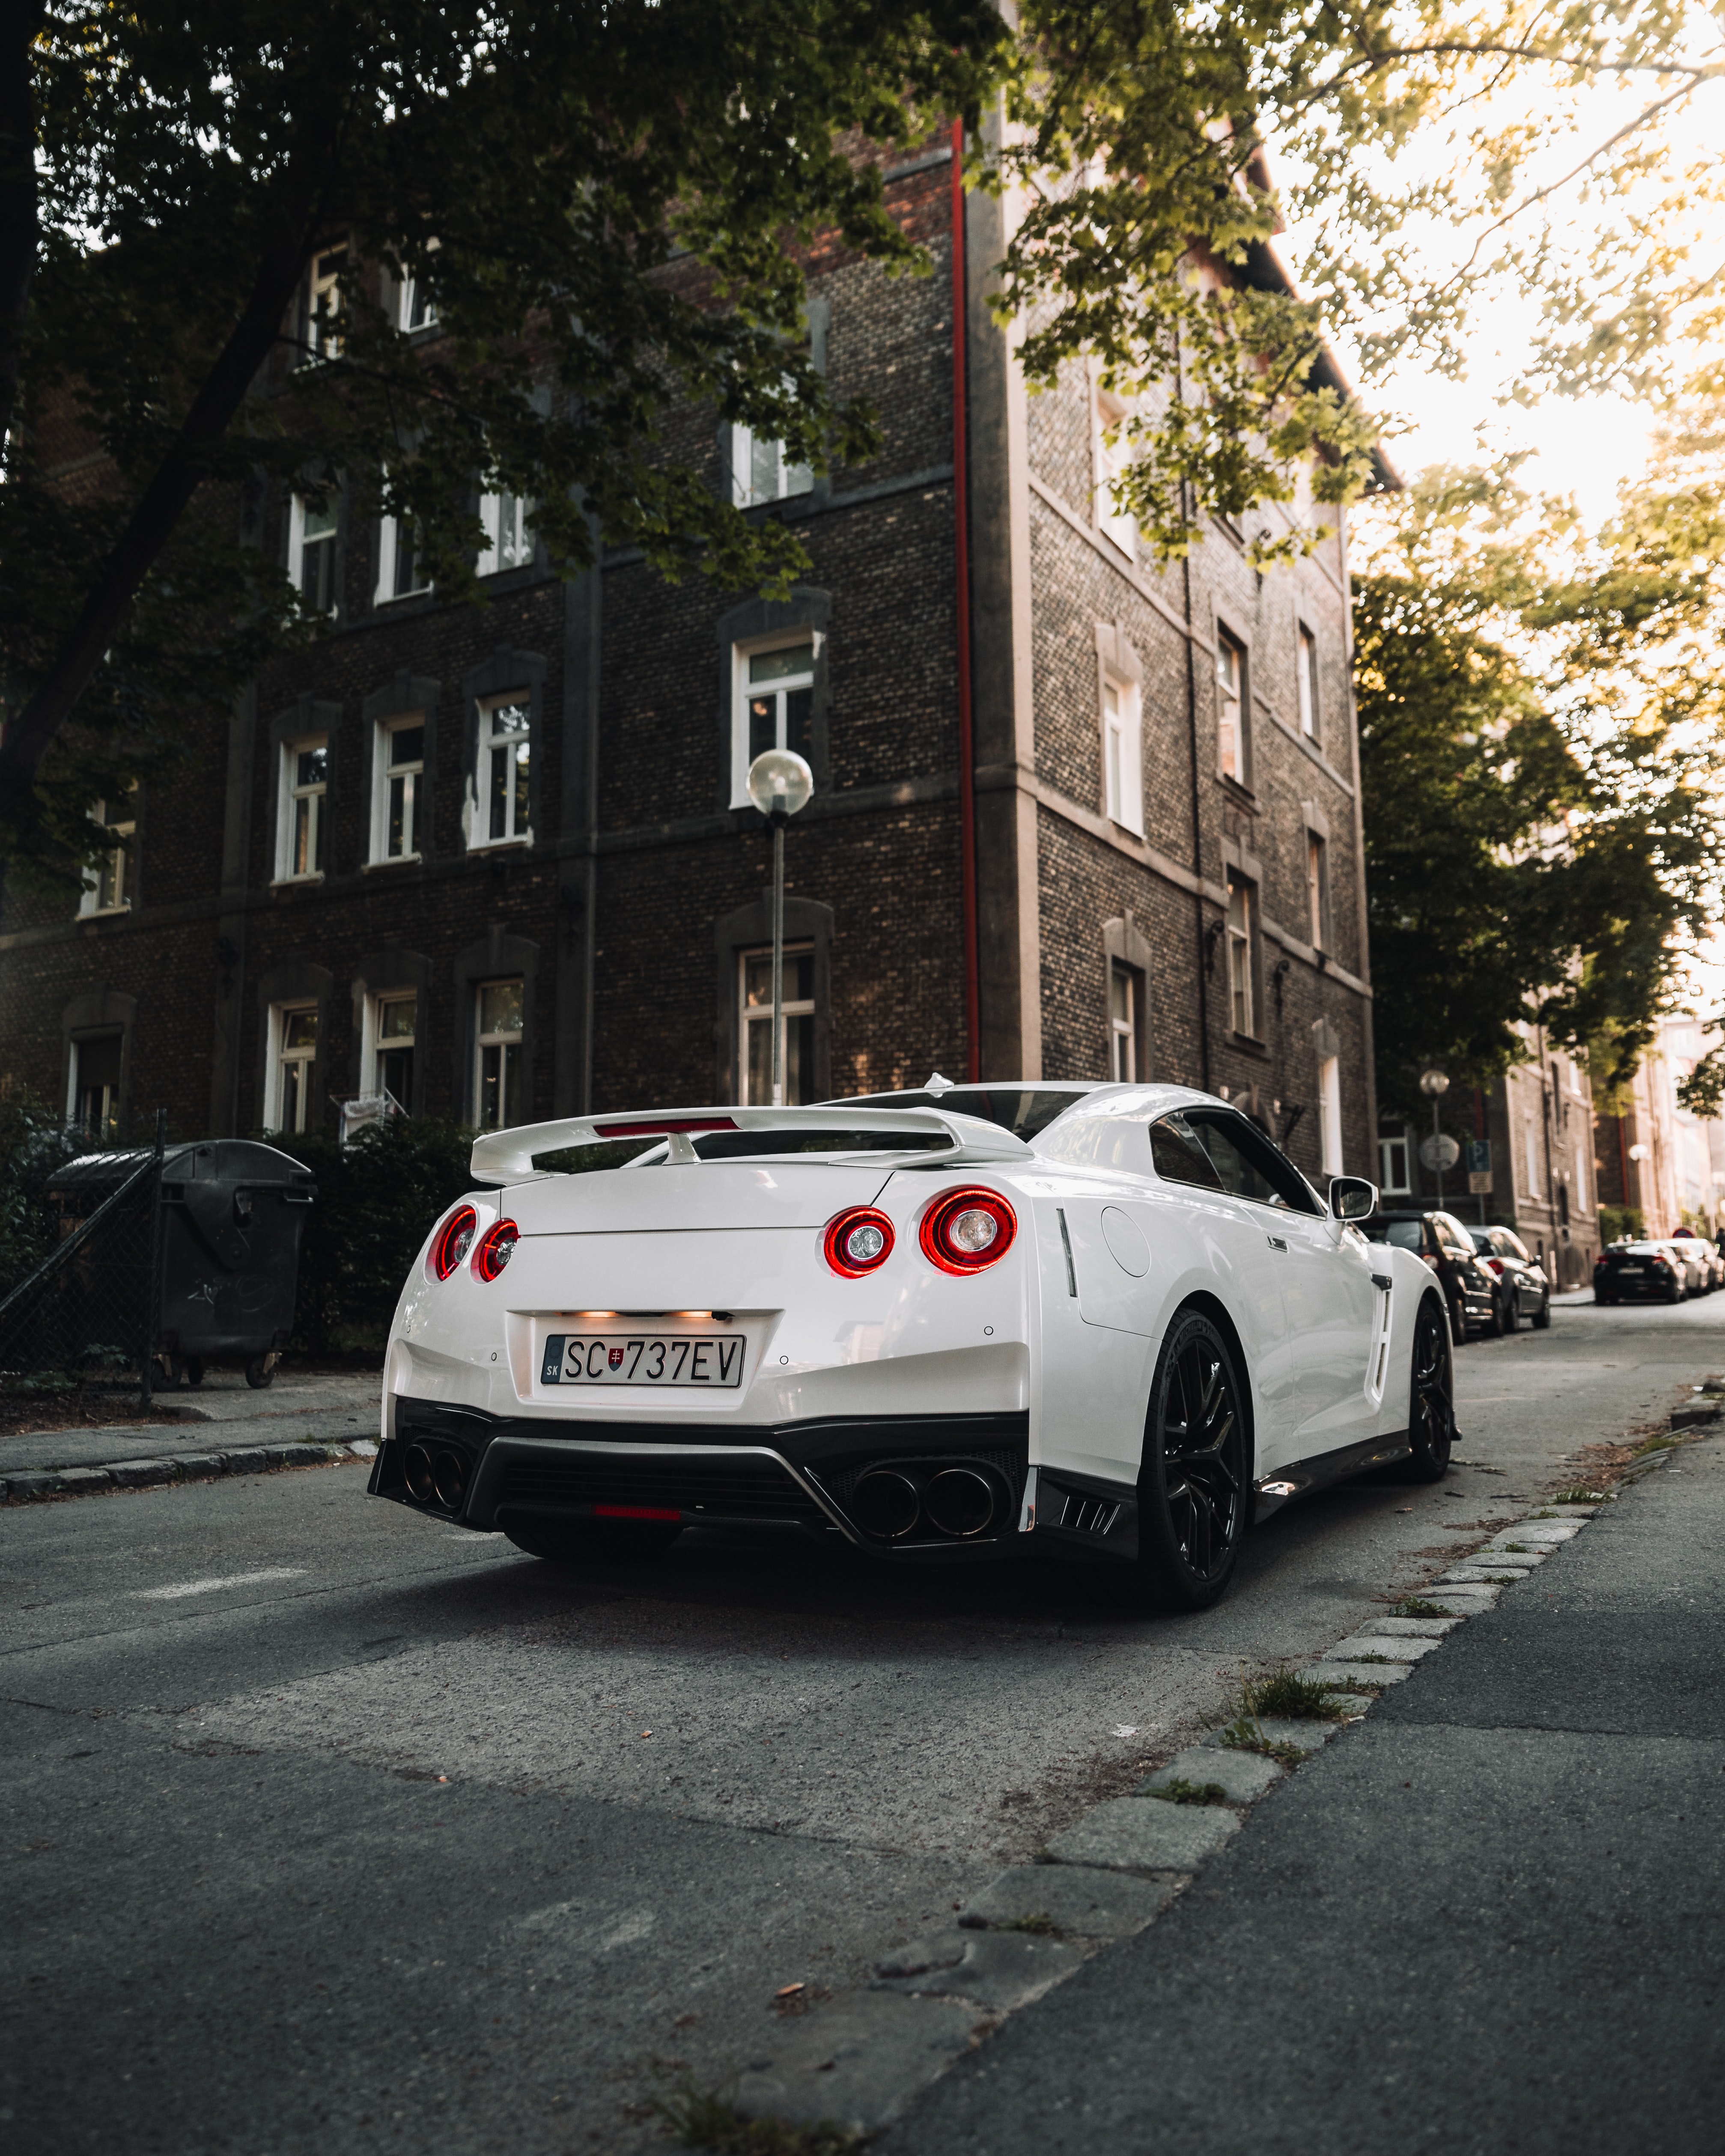 android nissan gt-r, sports car, sports, nissan, cars, car, back view, rear view